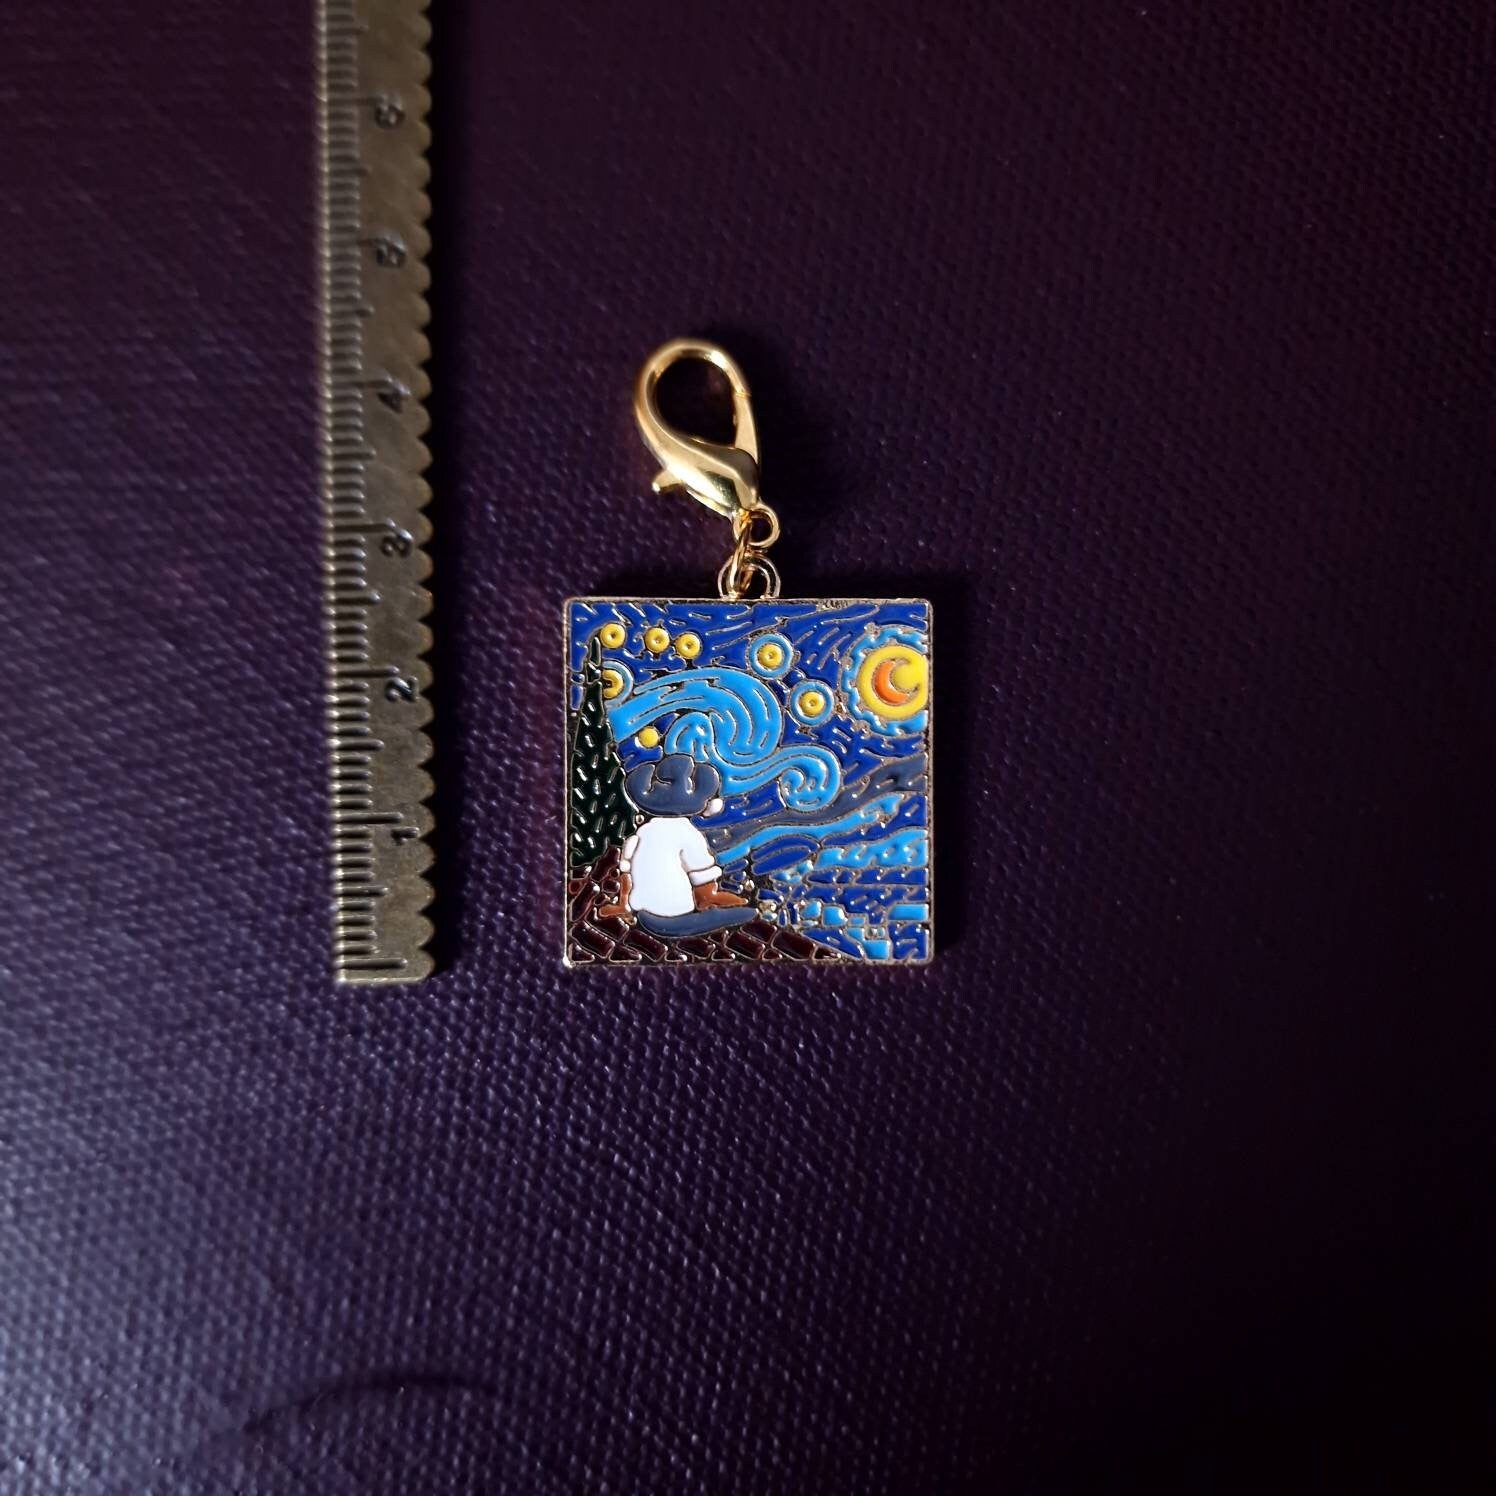 Stitch marker ~ Paintings ~ Knitting notions, progress markers, progress keepers, knitting tools, crochet notions